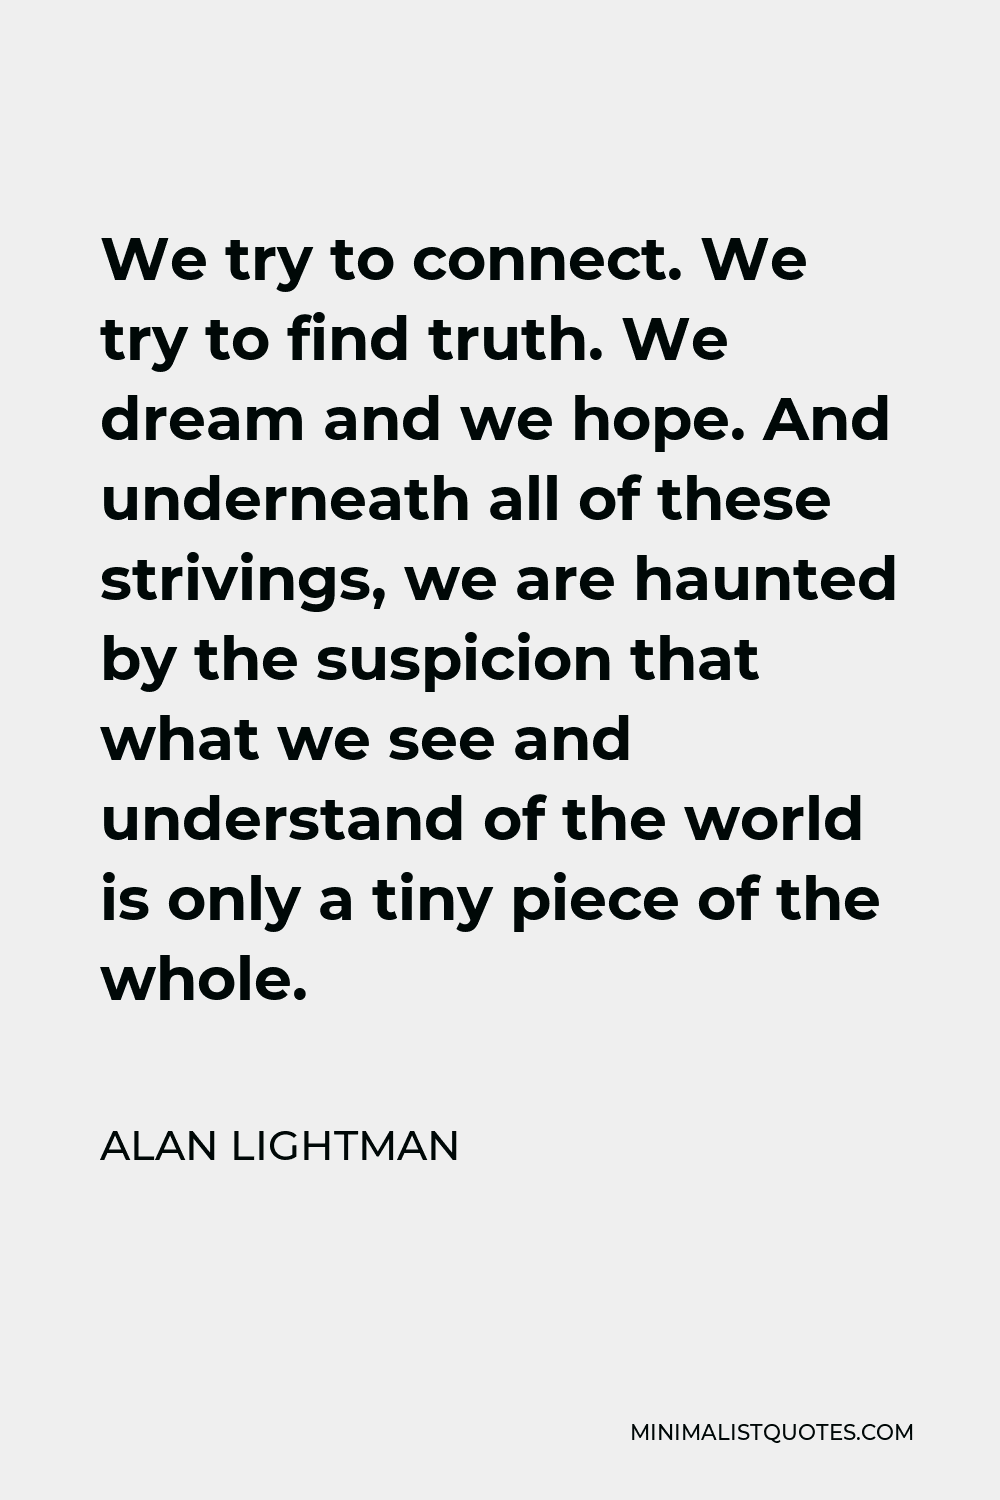 Alan Lightman Quote - We try to connect. We try to find truth. We dream and we hope. And underneath all of these strivings, we are haunted by the suspicion that what we see and understand of the world is only a tiny piece of the whole.